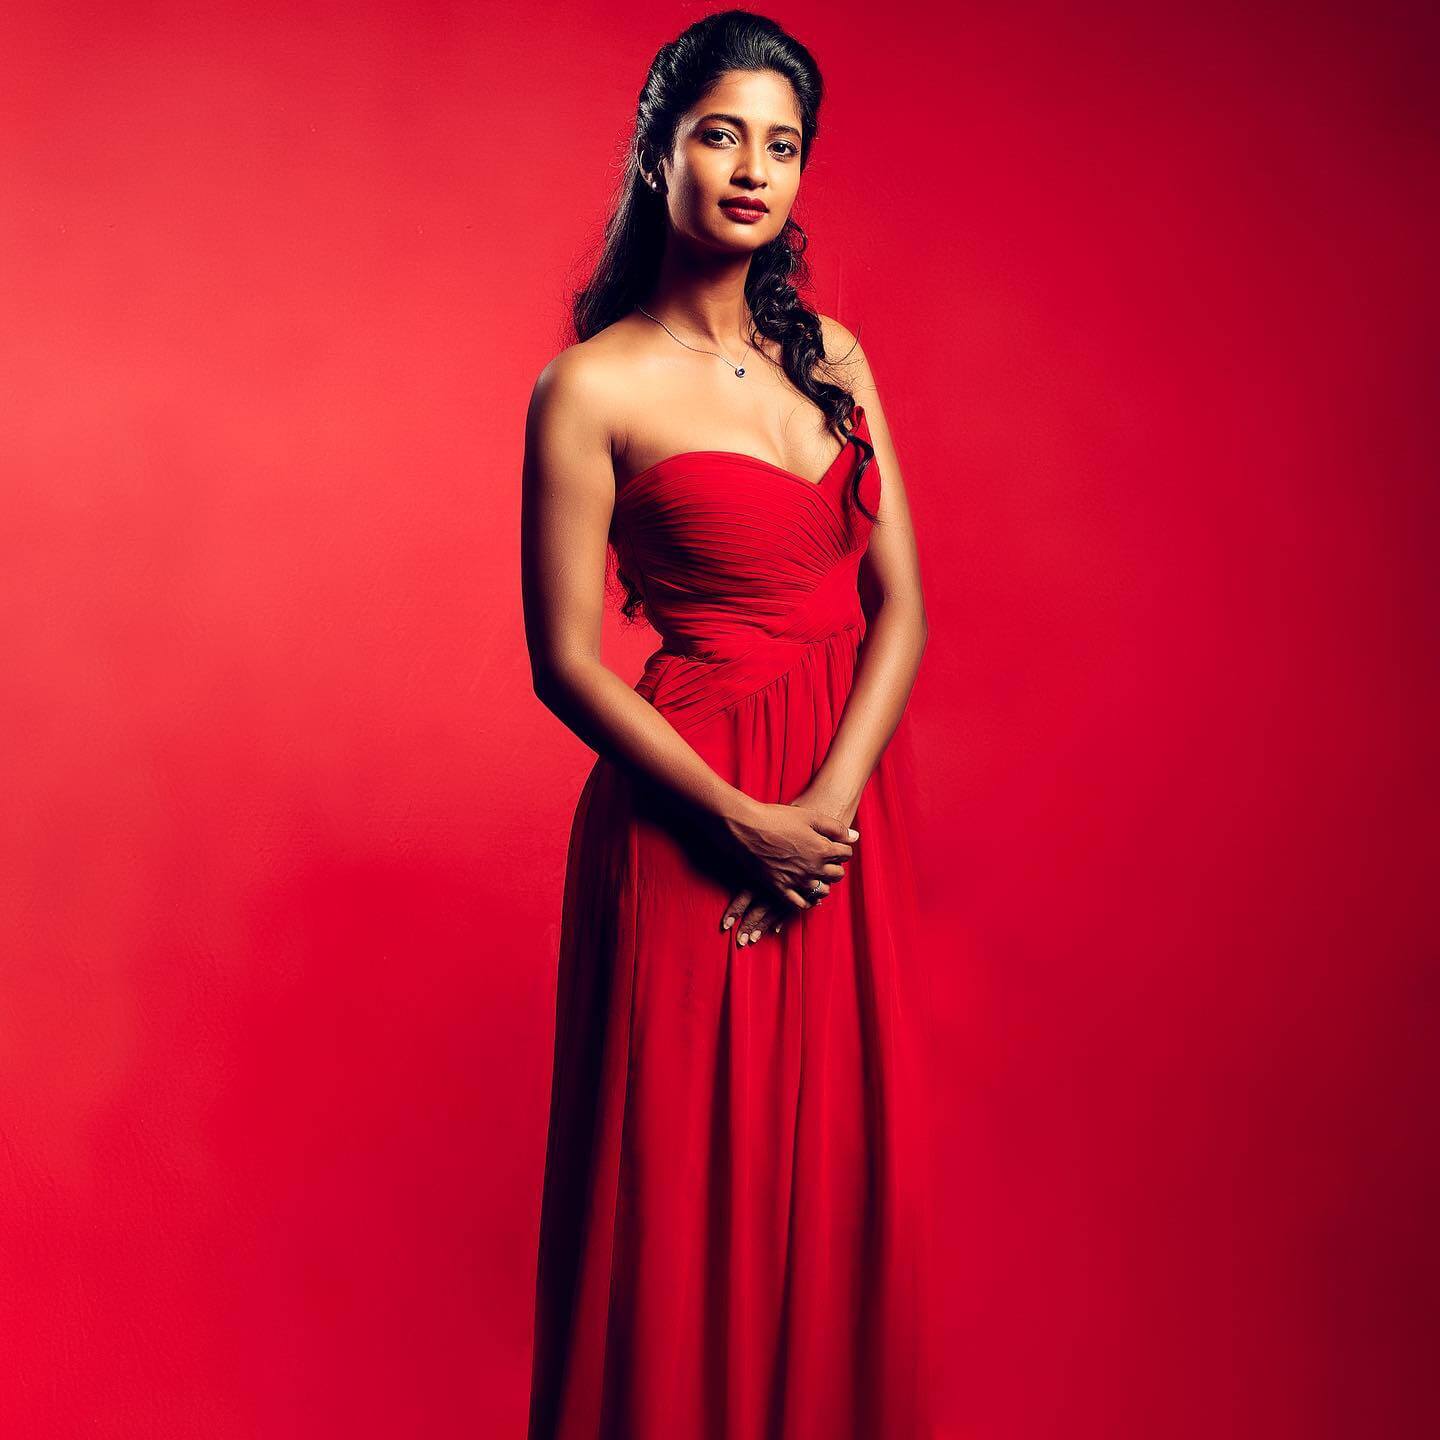 Anbirkiniyal Fame  Keerthi Pandian In Cherry Red Off Shoulder Long Dress Perfect Outfit For Date Night